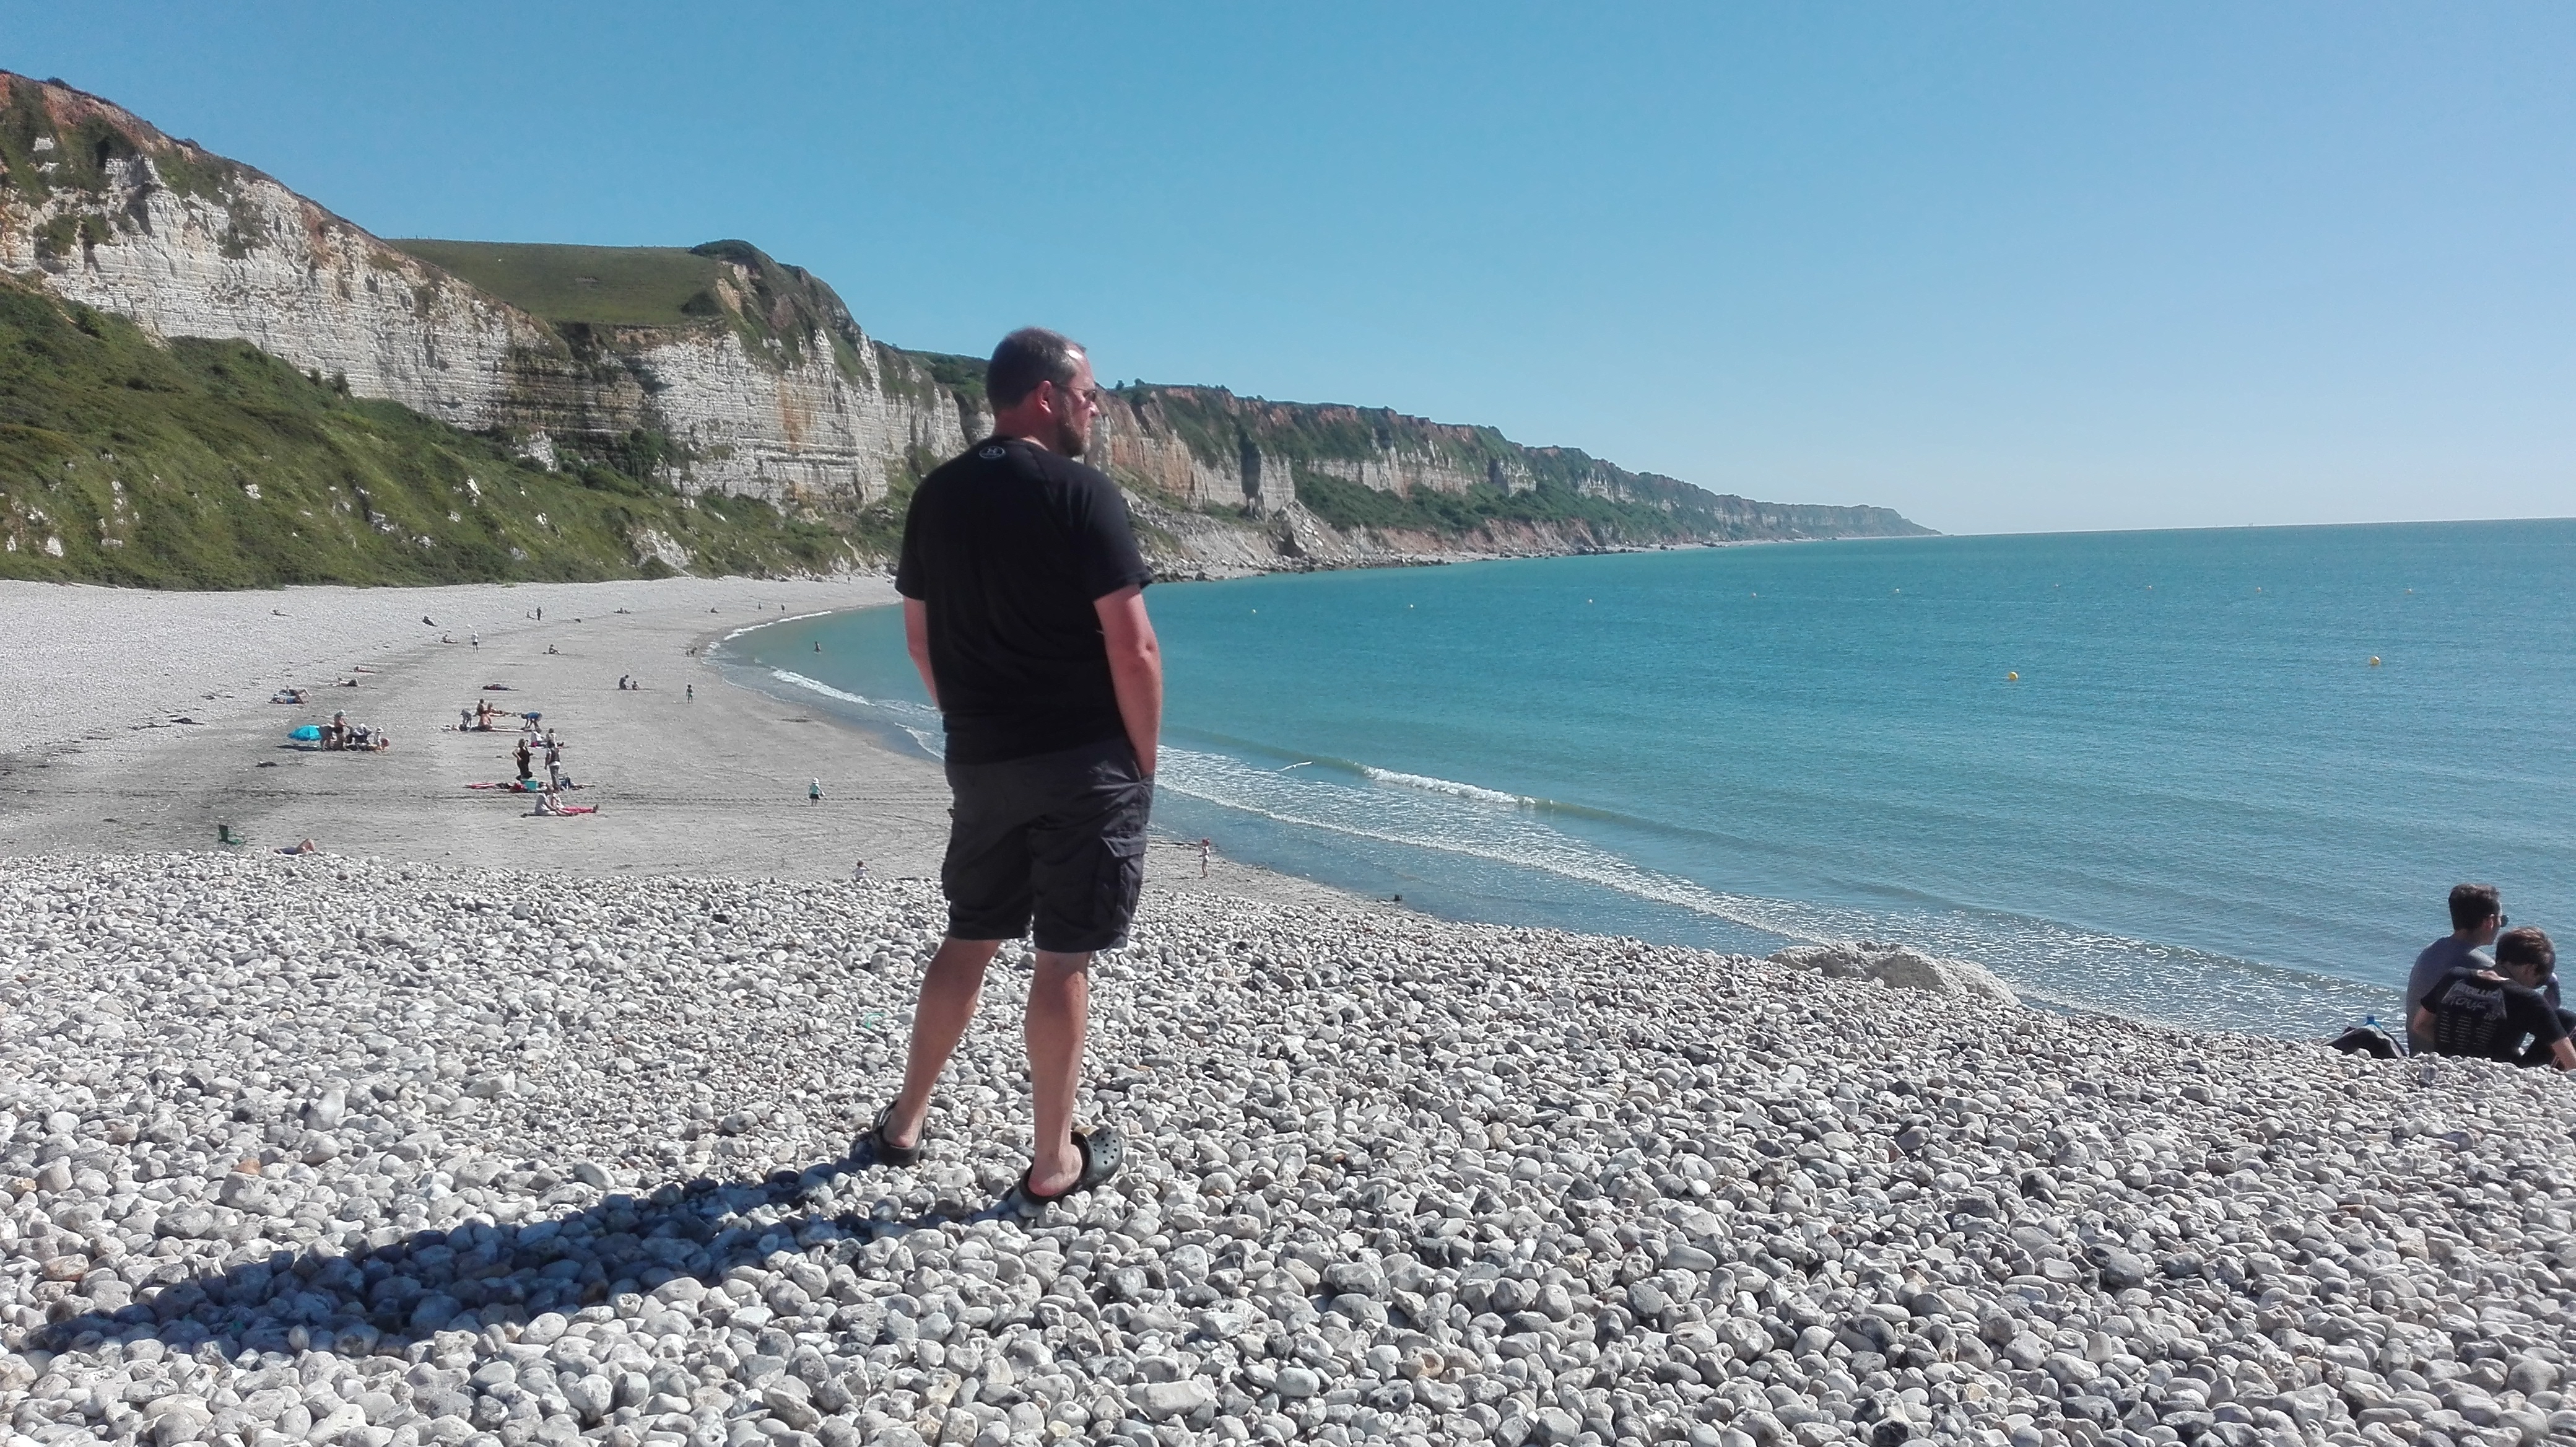 Saint-Jouin-Bruneval-Plage – never heared of this place before!